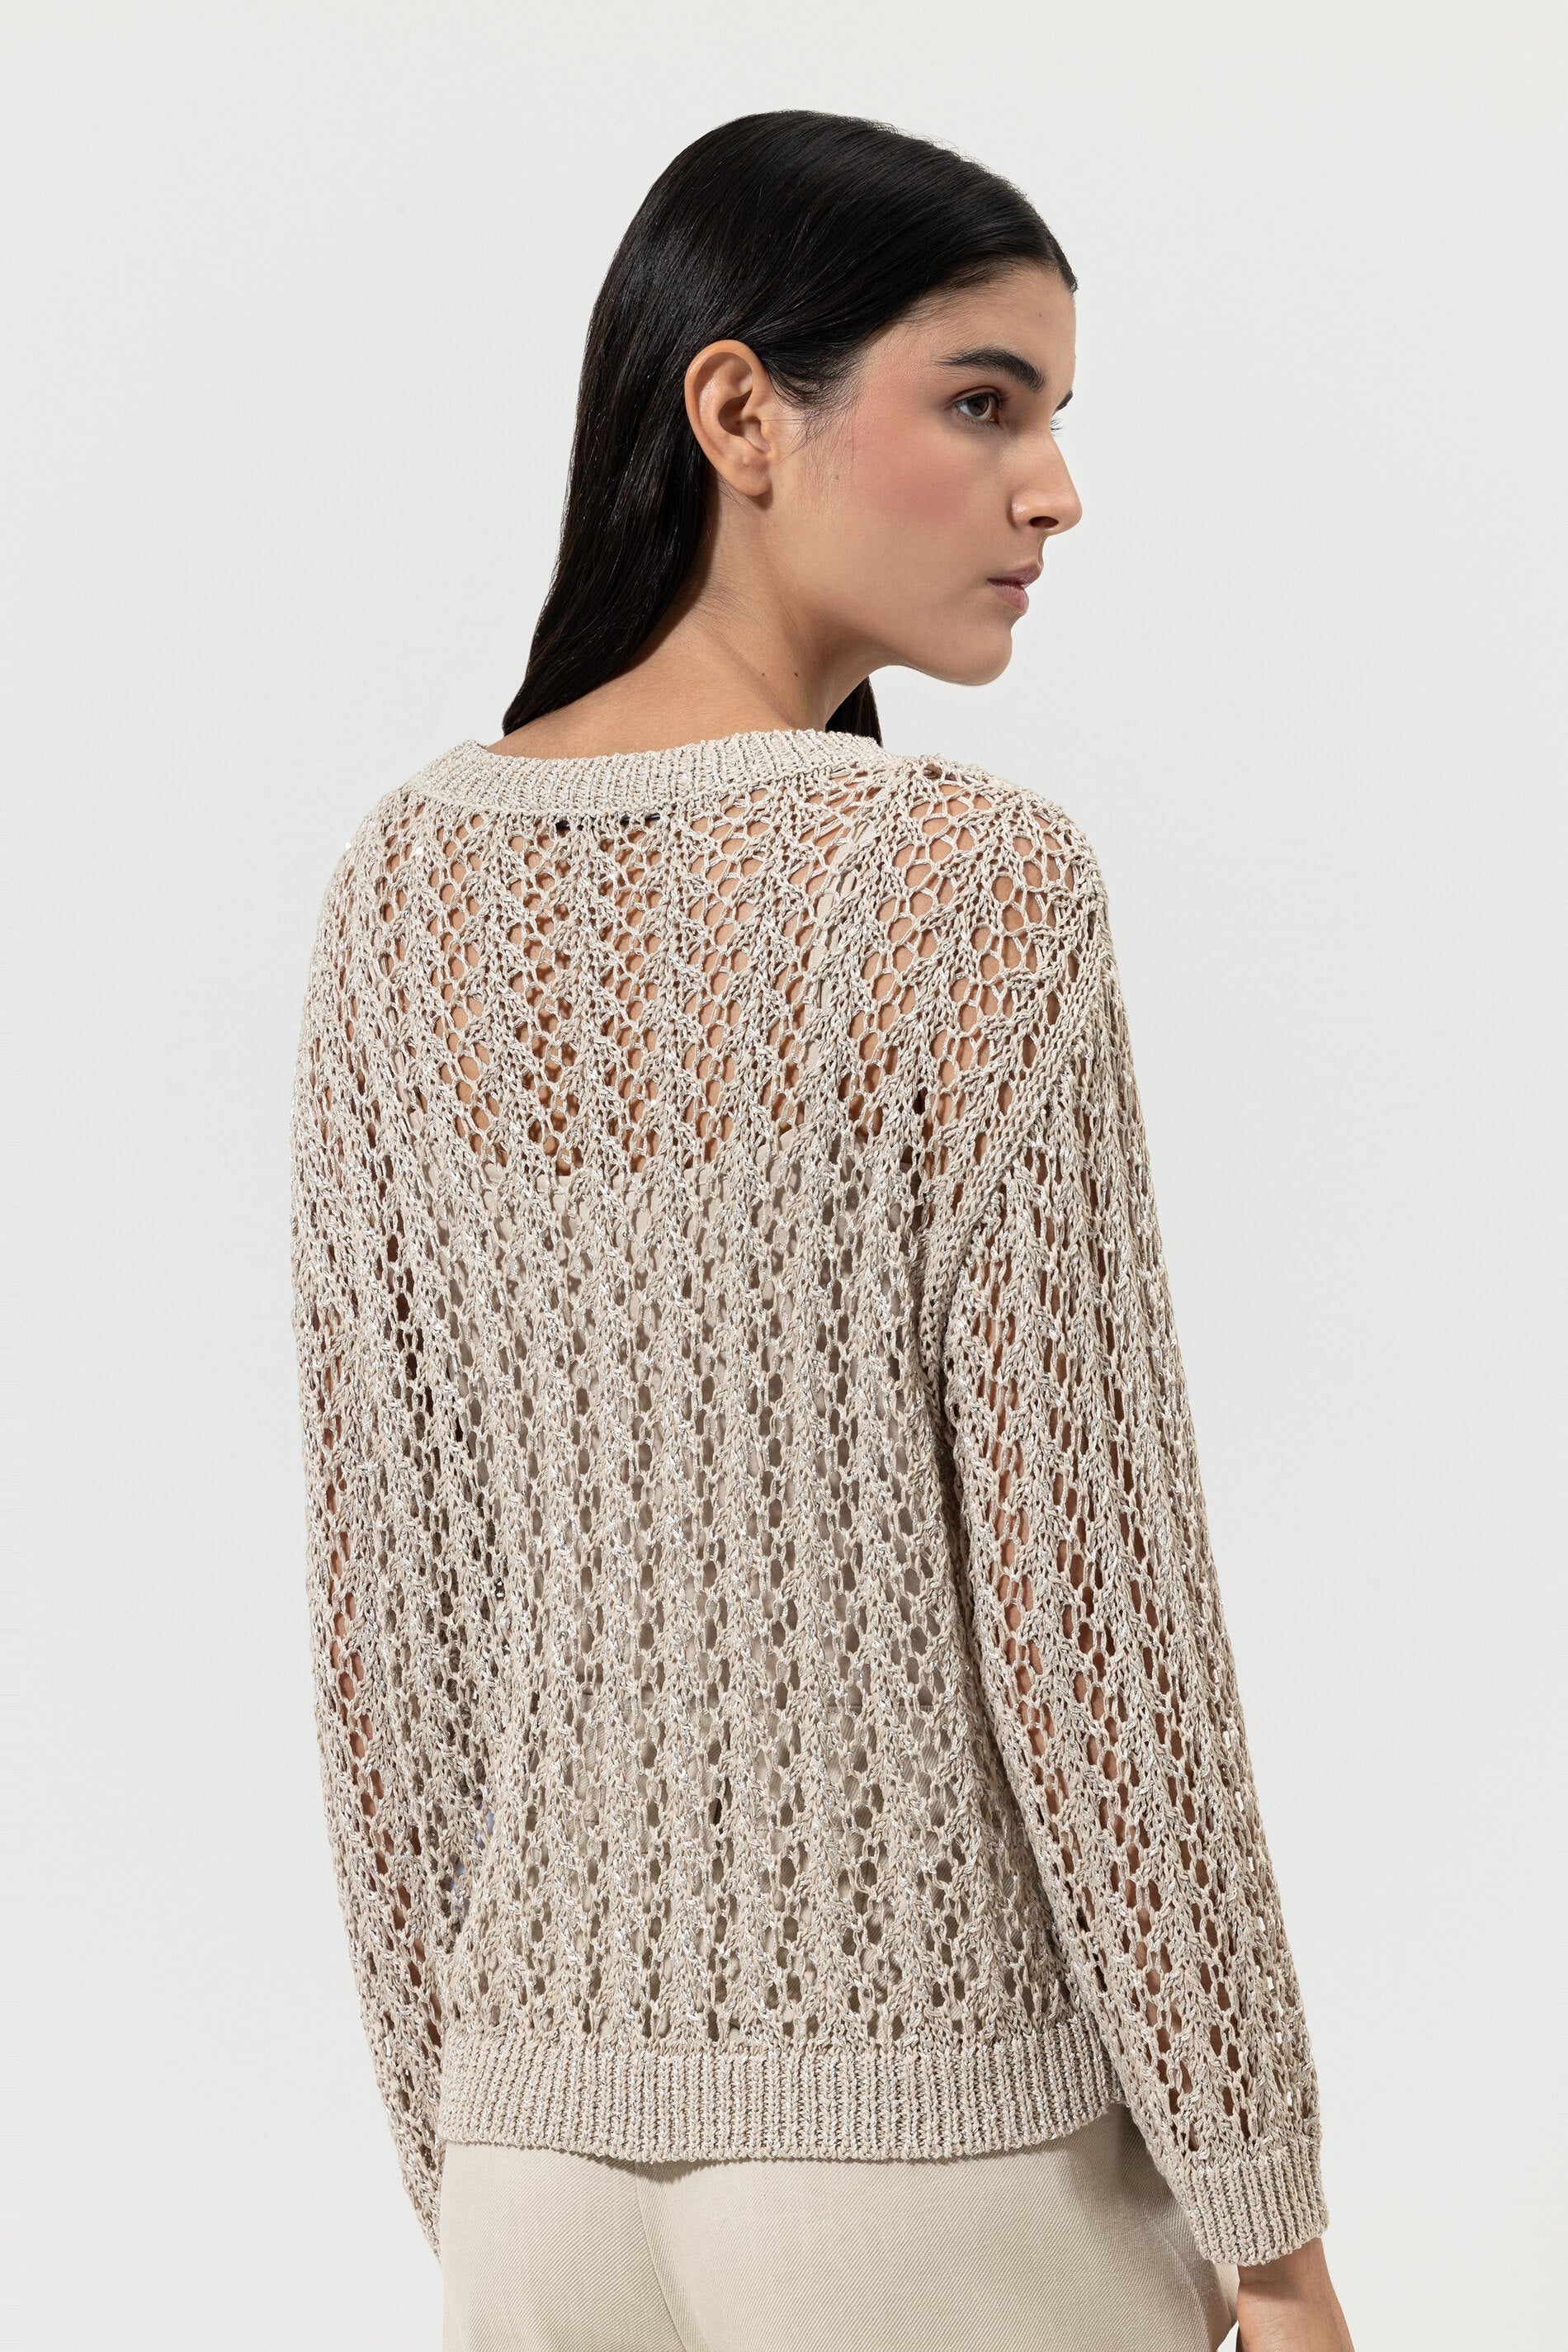 LUISA-CERANO-OUTLET-SALE-Pullover-in-Ajour-Muster-Strick-ARCHIVE-COLLECTION-4_f867945d-0dee-43d6-9be9-9376a04077a3.jpg